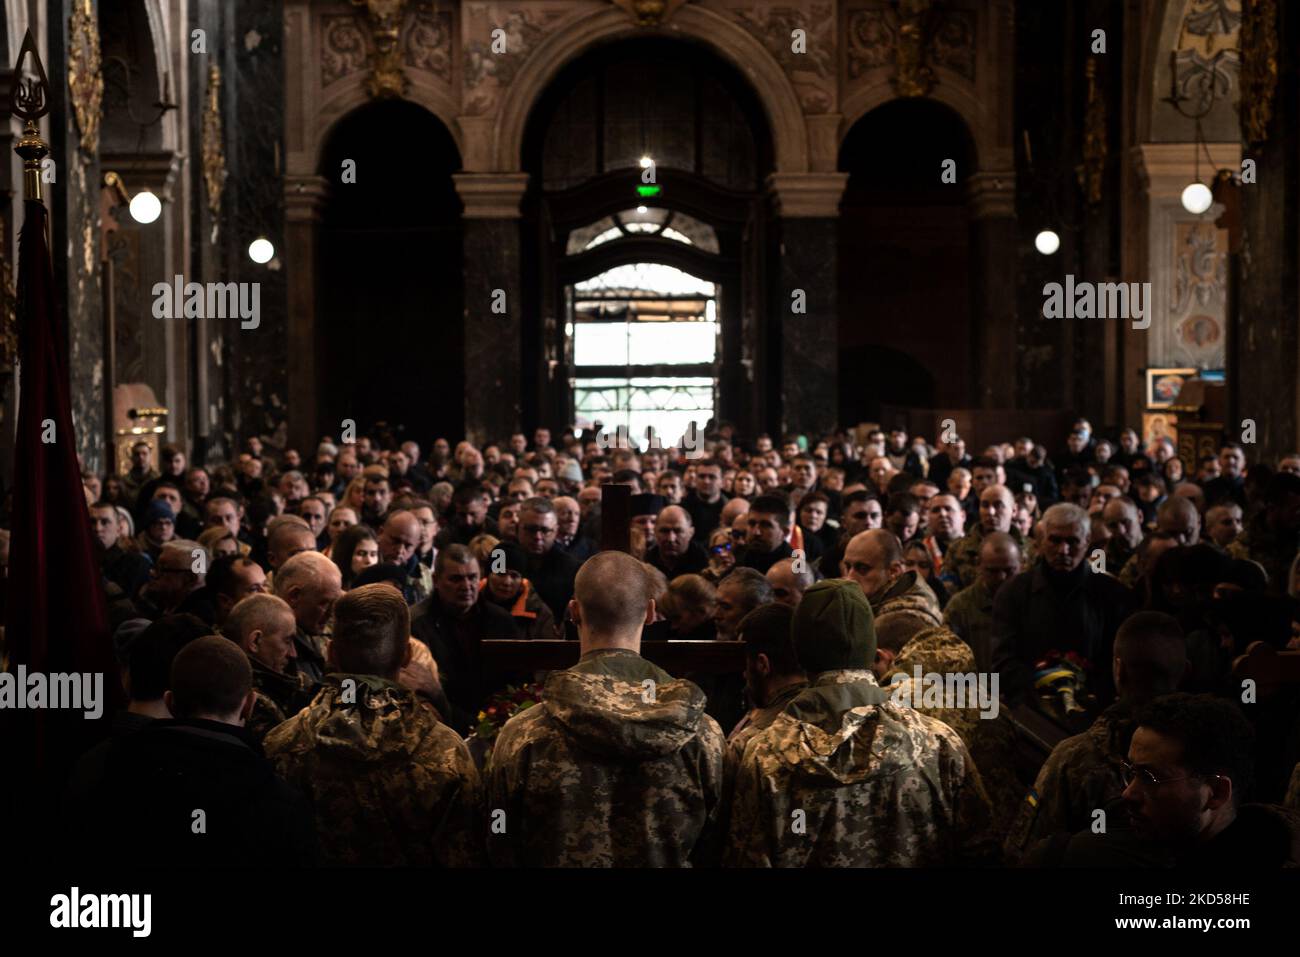 Funeral of 4 of the 35 victims of the russian missile attack on the Yavoriv Military Base ocurred last Sunday 13th, in Lviv, Ukraine, on March 15, 2022. Around 30 missiles launched on the Black Sea were partially intercepted by the Ukrainian defeses, but 9 of them hit the Yavoriv base, about 20 km from the Polish border and which in February received NATO troops. 35 soldiers died in the attack, and 135 were wounded (Photo by Gustavo Basso/NurPhoto) Stock Photo